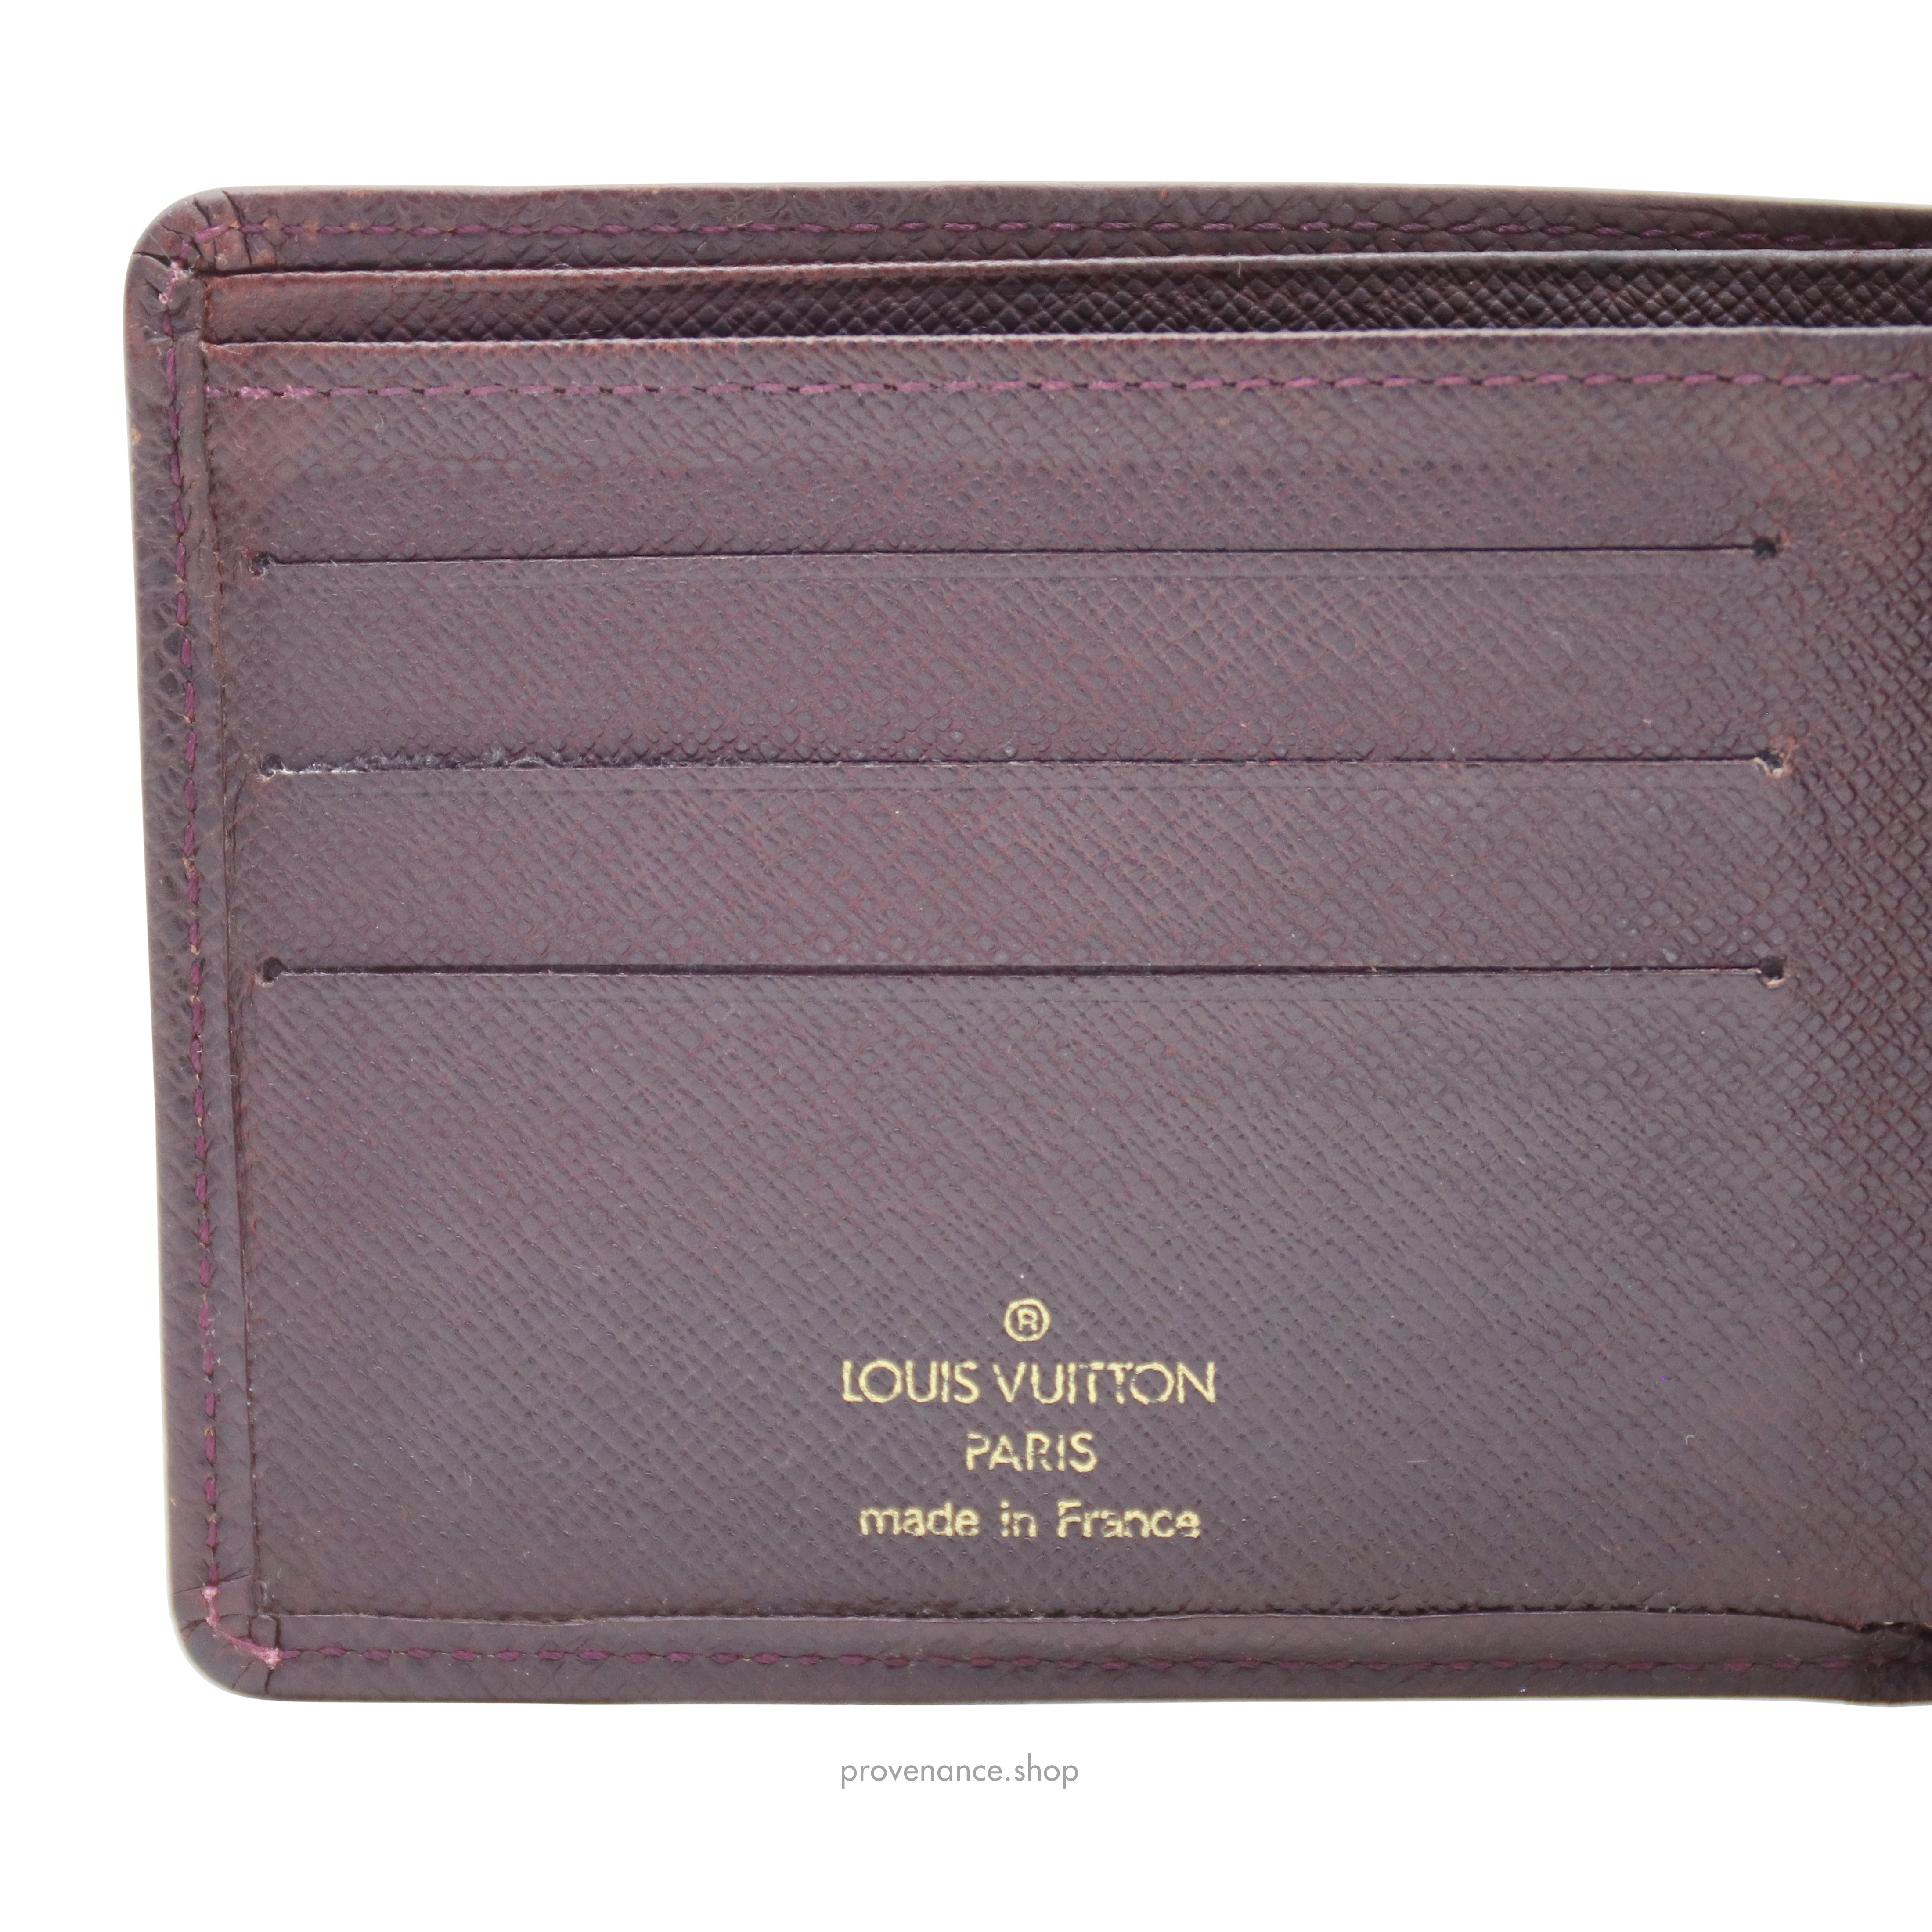 Slender Wallet Taiga Leather - Men - Personalization